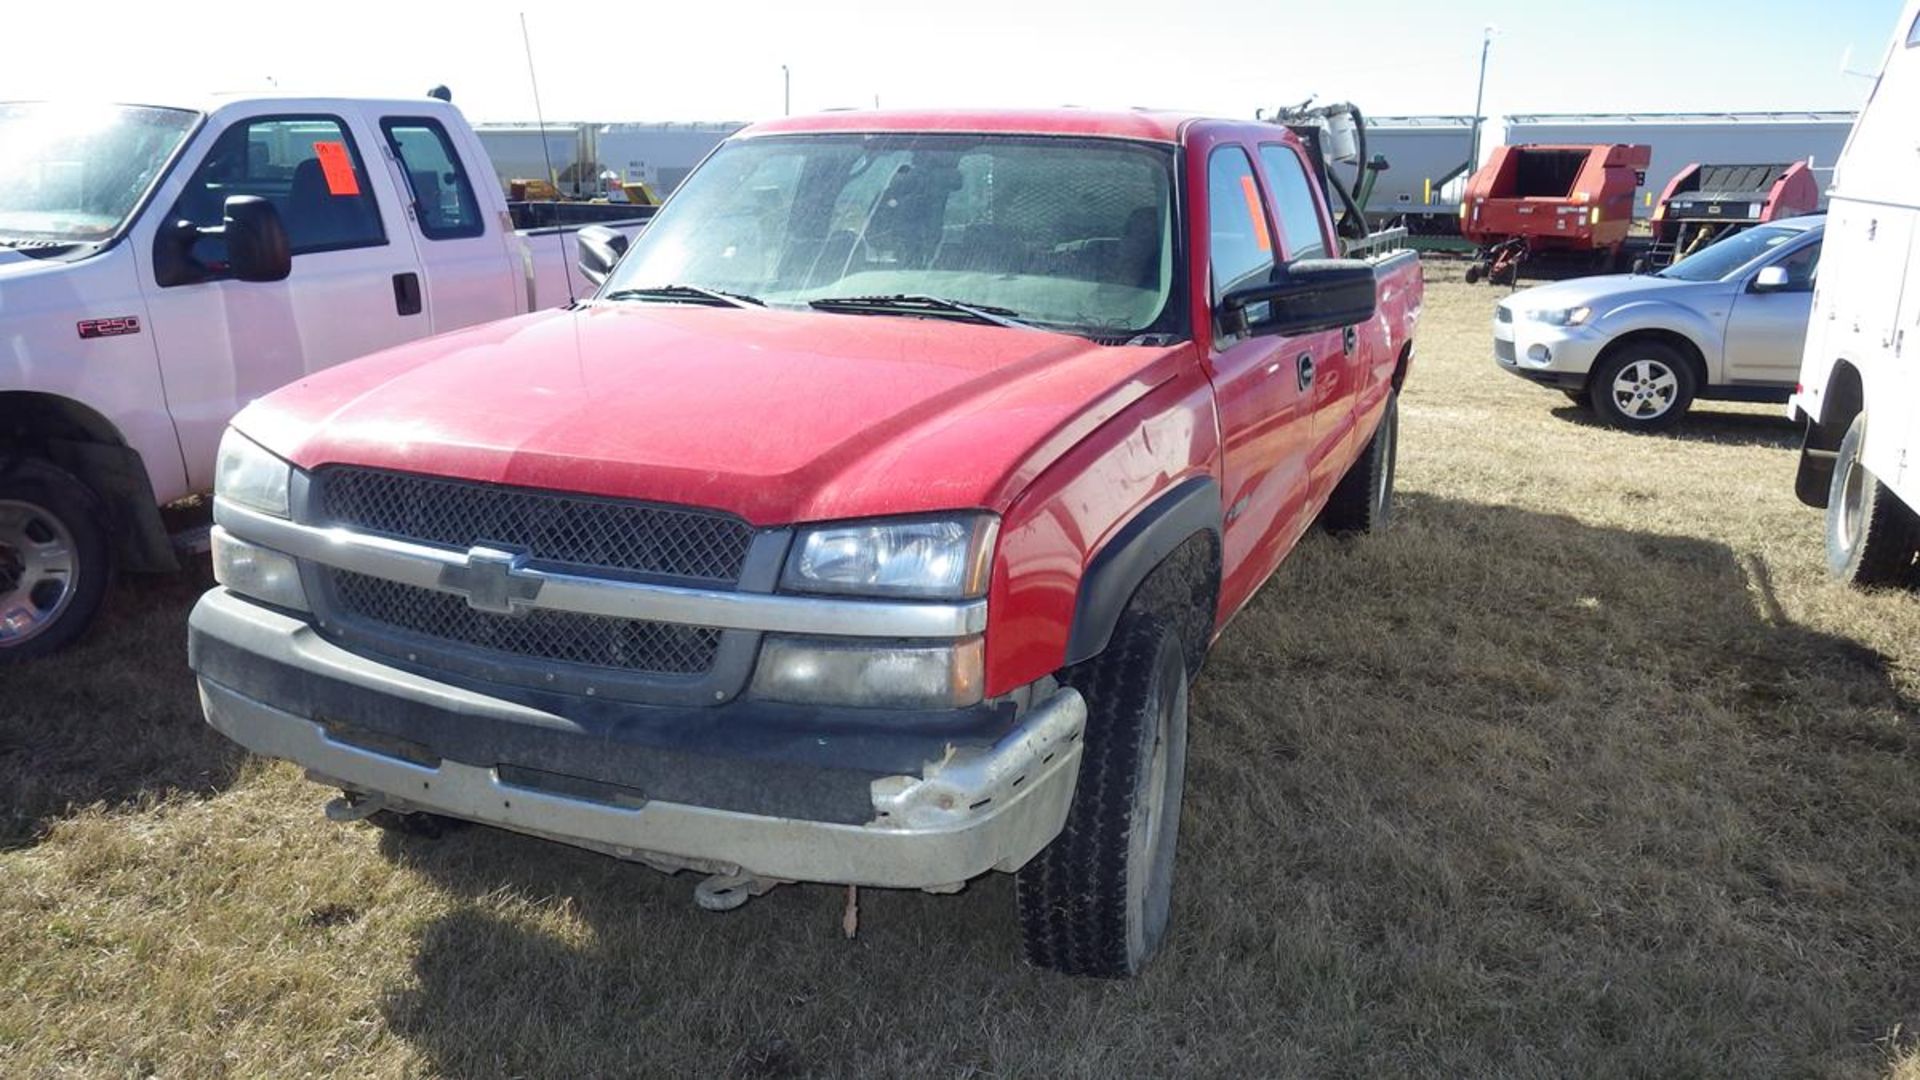 2004 Chev 3500 6.0L vortec V8 4 x 4 crew cab Vin# 1GBHK33G14F236199 showing 171,759 Kms and 4717.7